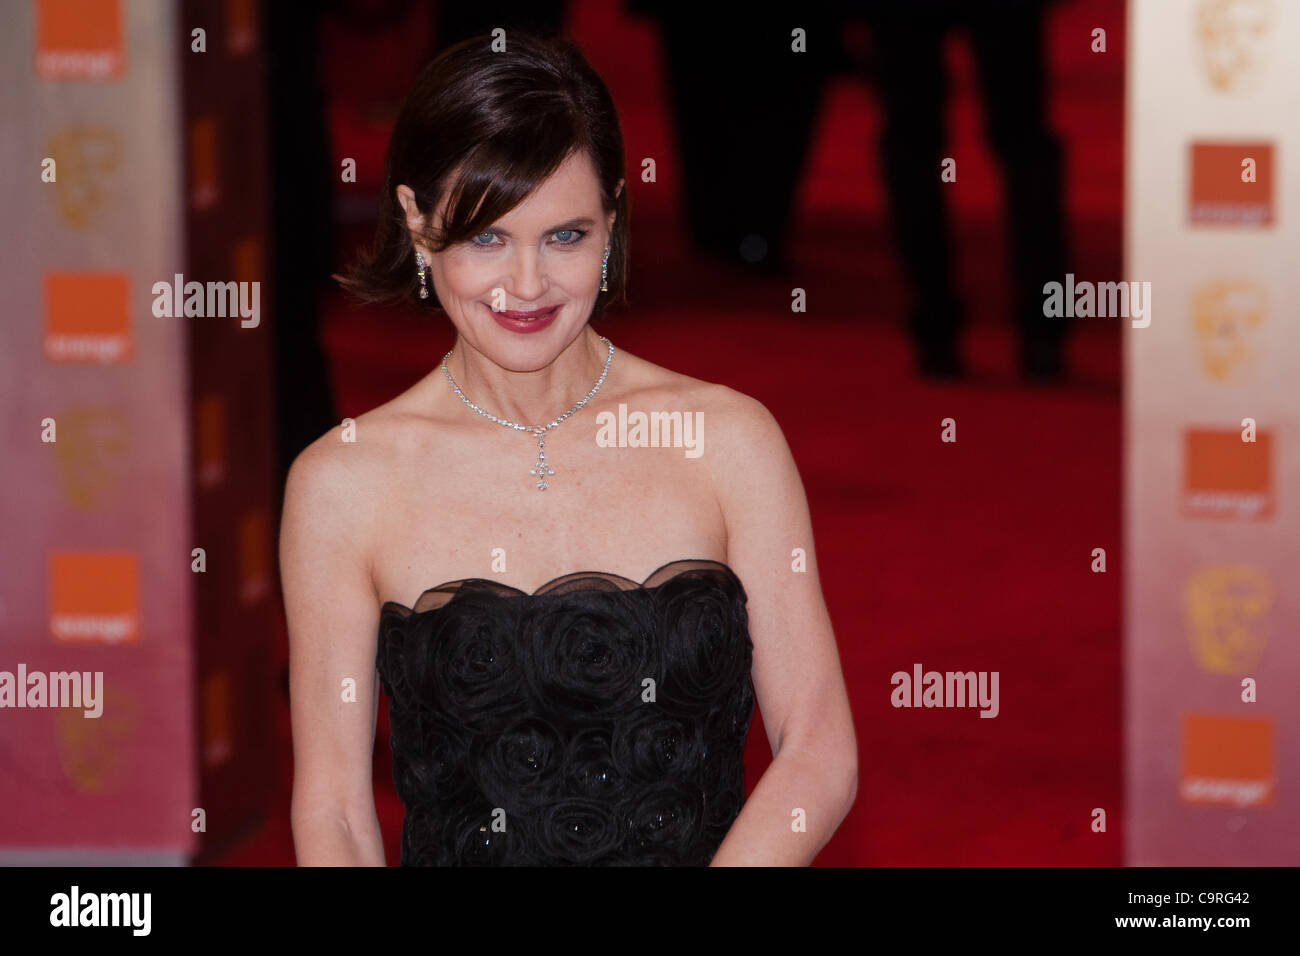 London, UK, 12/02/2012. Actress,  Elizabeth McGovern, arriving on the red carpet at the 2012 BAFTAs Stock Photo